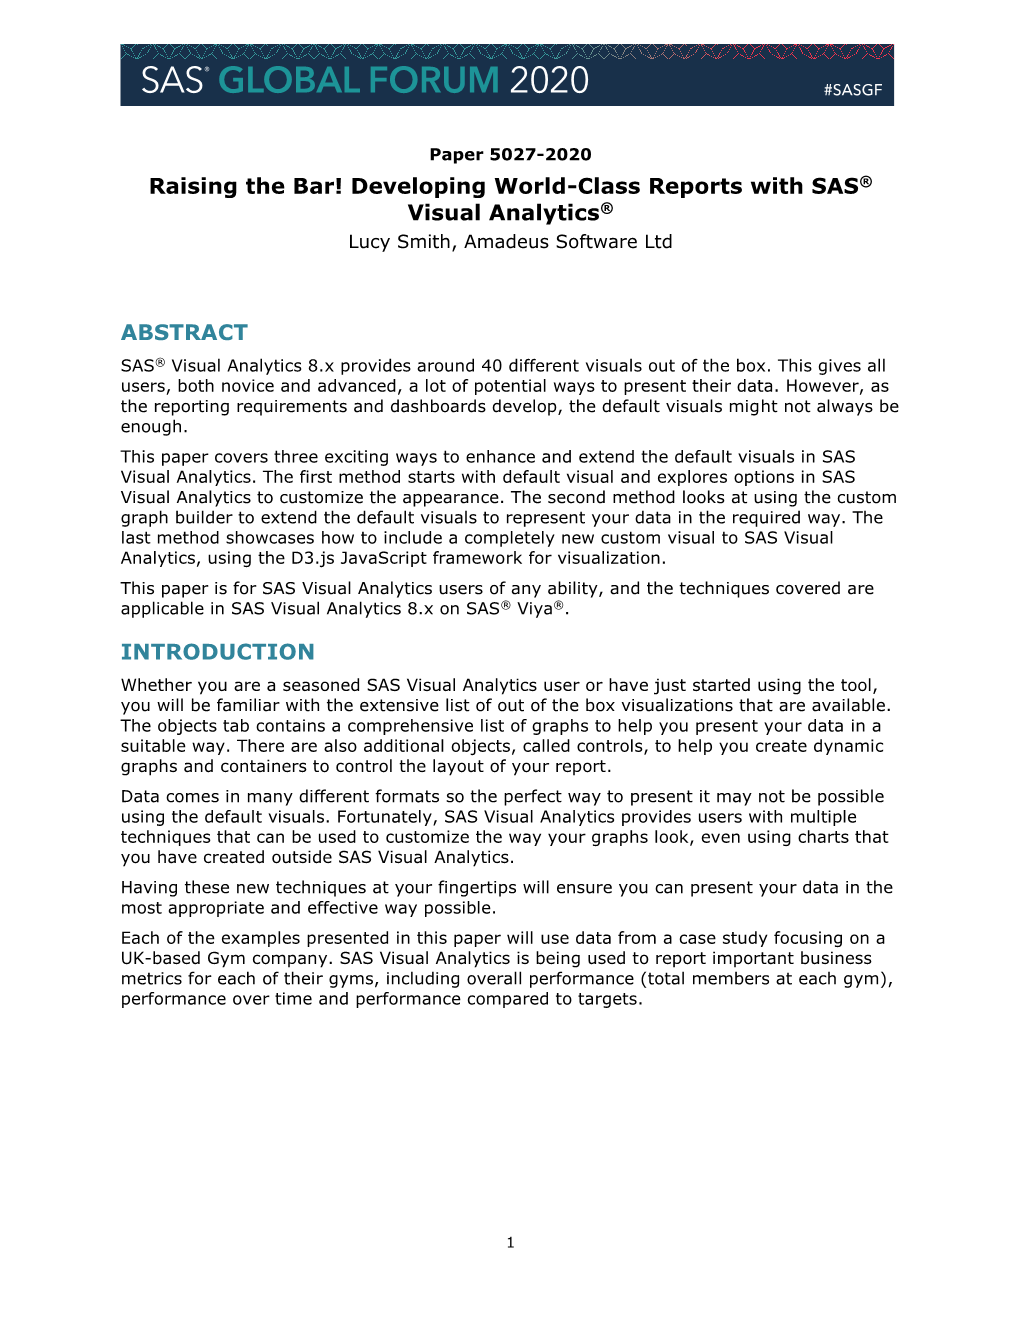 Developing World-Class Reports with SAS® Visual Analytics® Lucy Smith, Amadeus Software Ltd